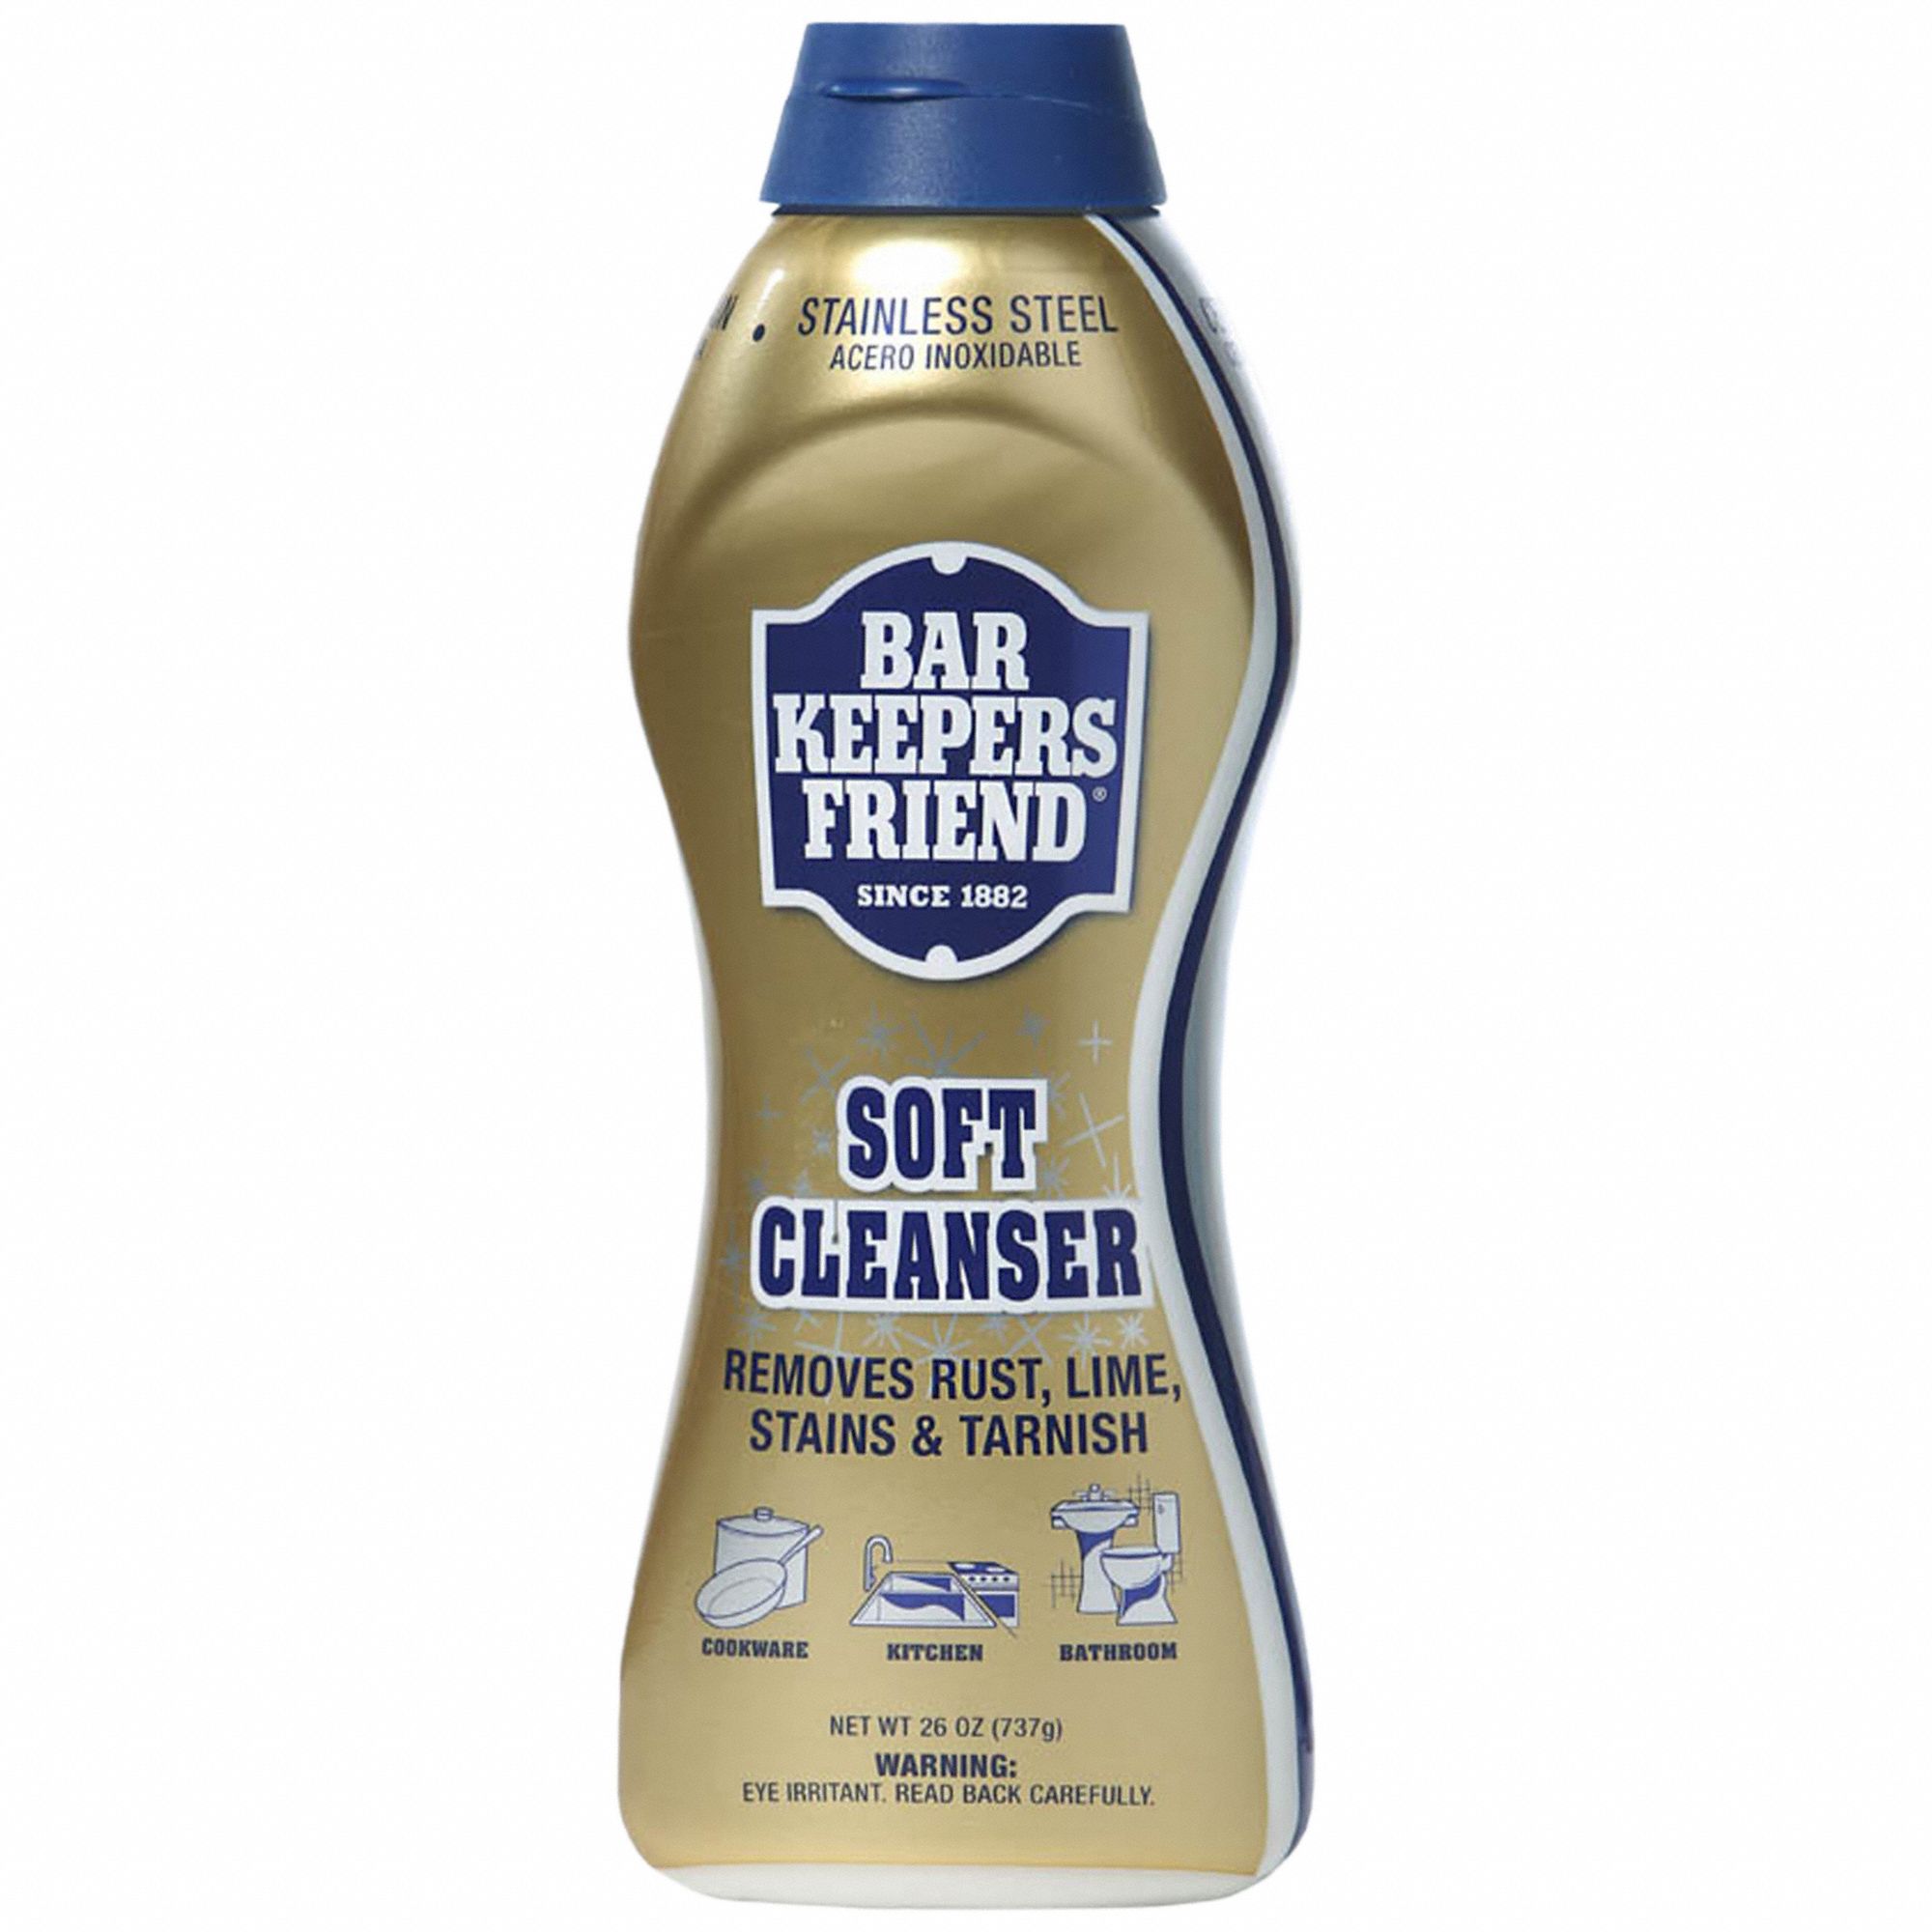 BAR KEEPERS FRIEND, Bottle, 26 oz Container Size, Soft Cleanser -  800XH9